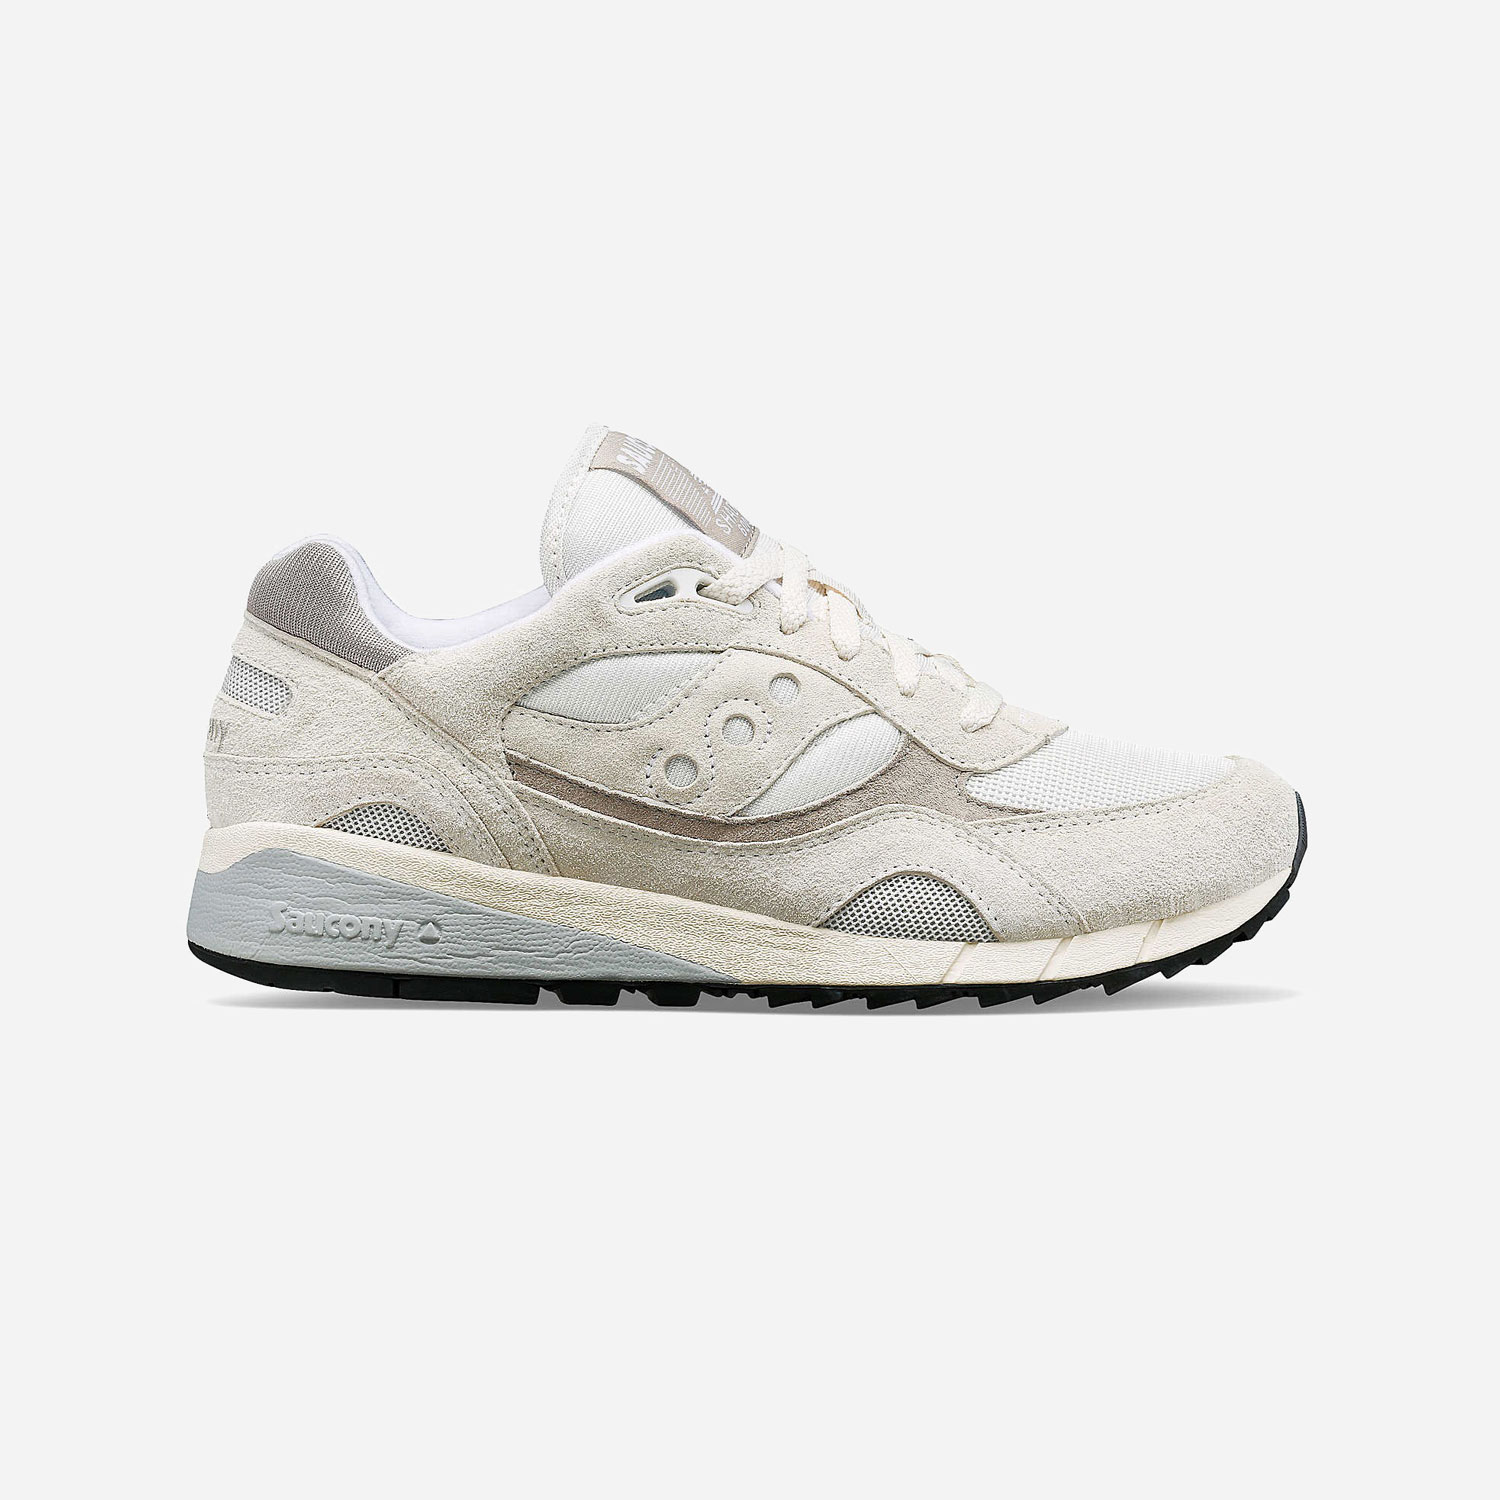 Saucony Shadow 6000 Trainer - White/Grey